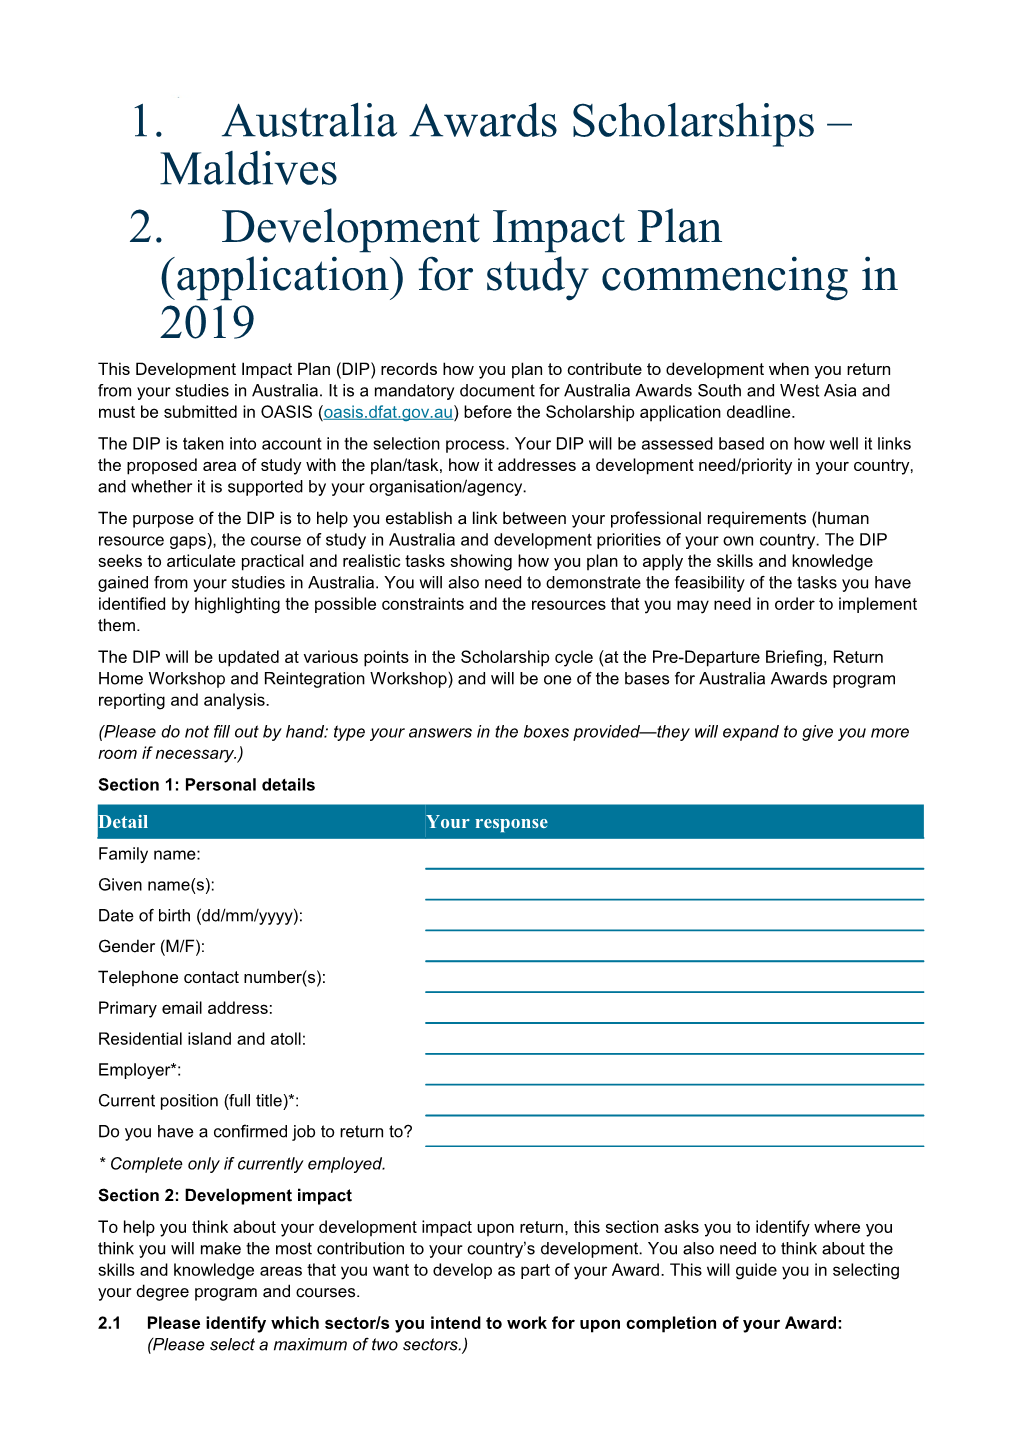 Development Impact Plan(Application)For Study Commencing in 2019